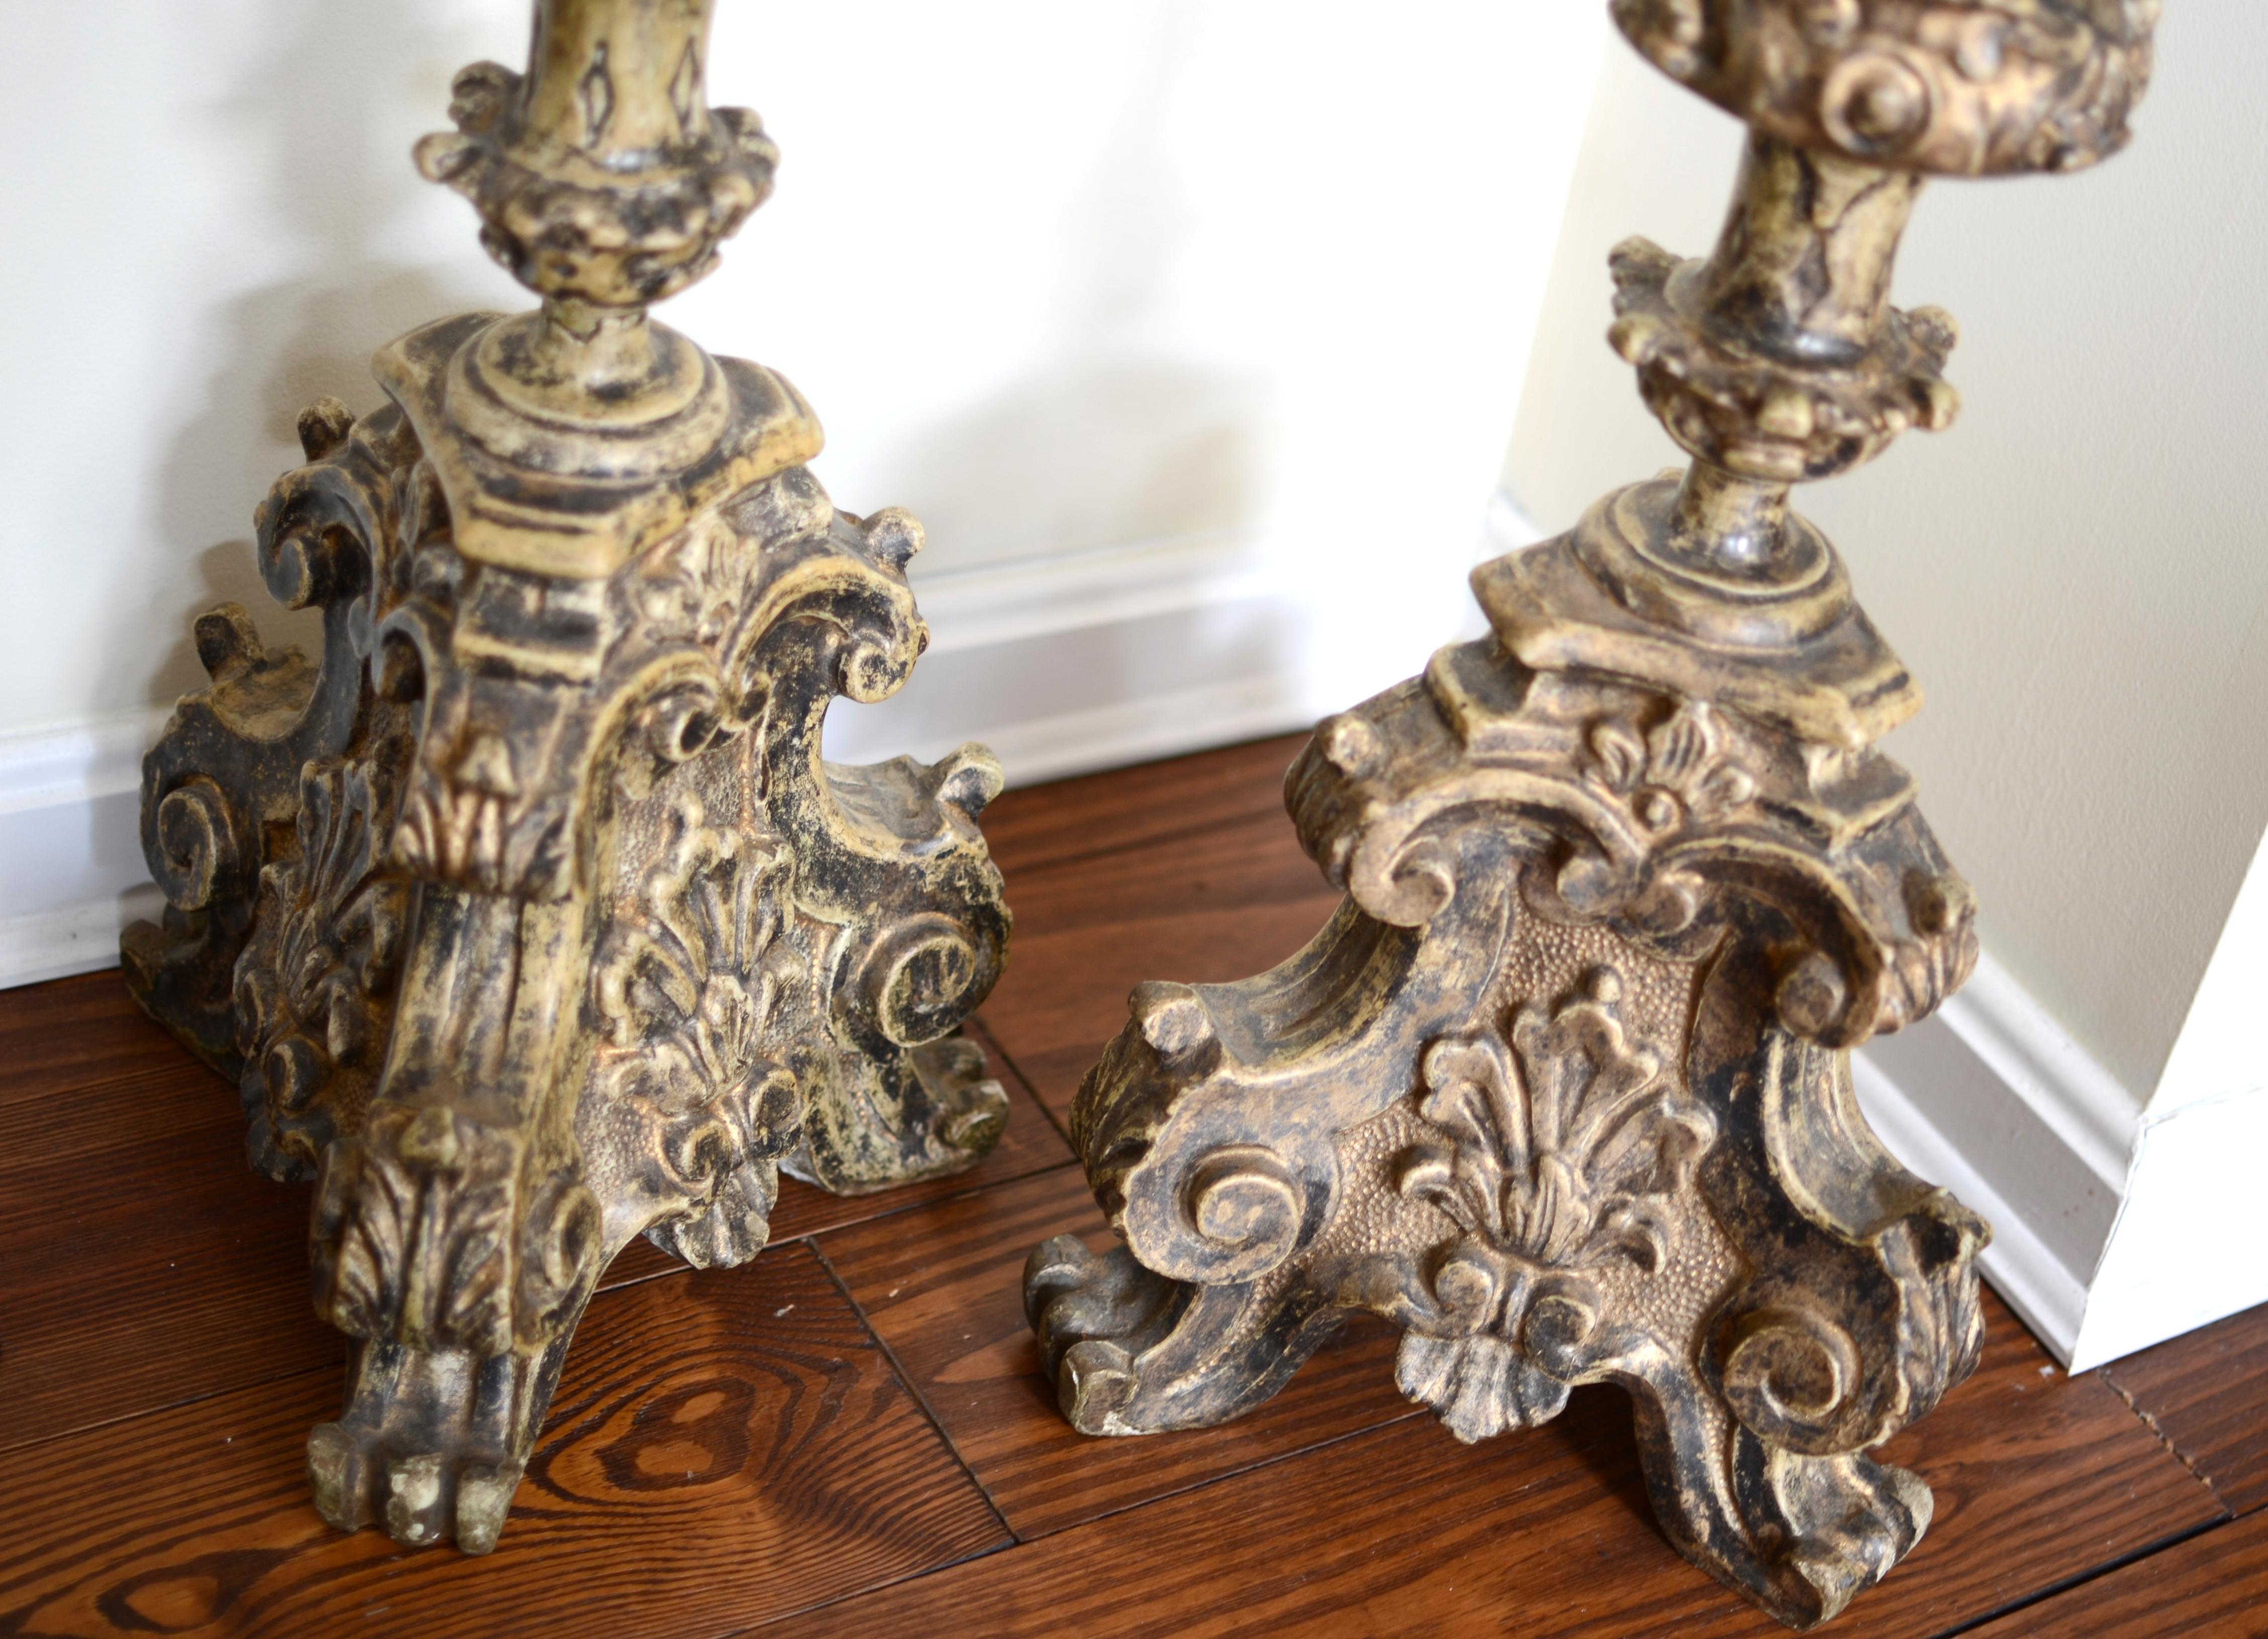 A pair of antique decorative plaster and wood Italian candelabras.

Italy; early 18th century style, possibly made in the 19th century
Approximate size: 81 cm (h) each

A pair of elaborately realized candelabras in carved-wood with traces of